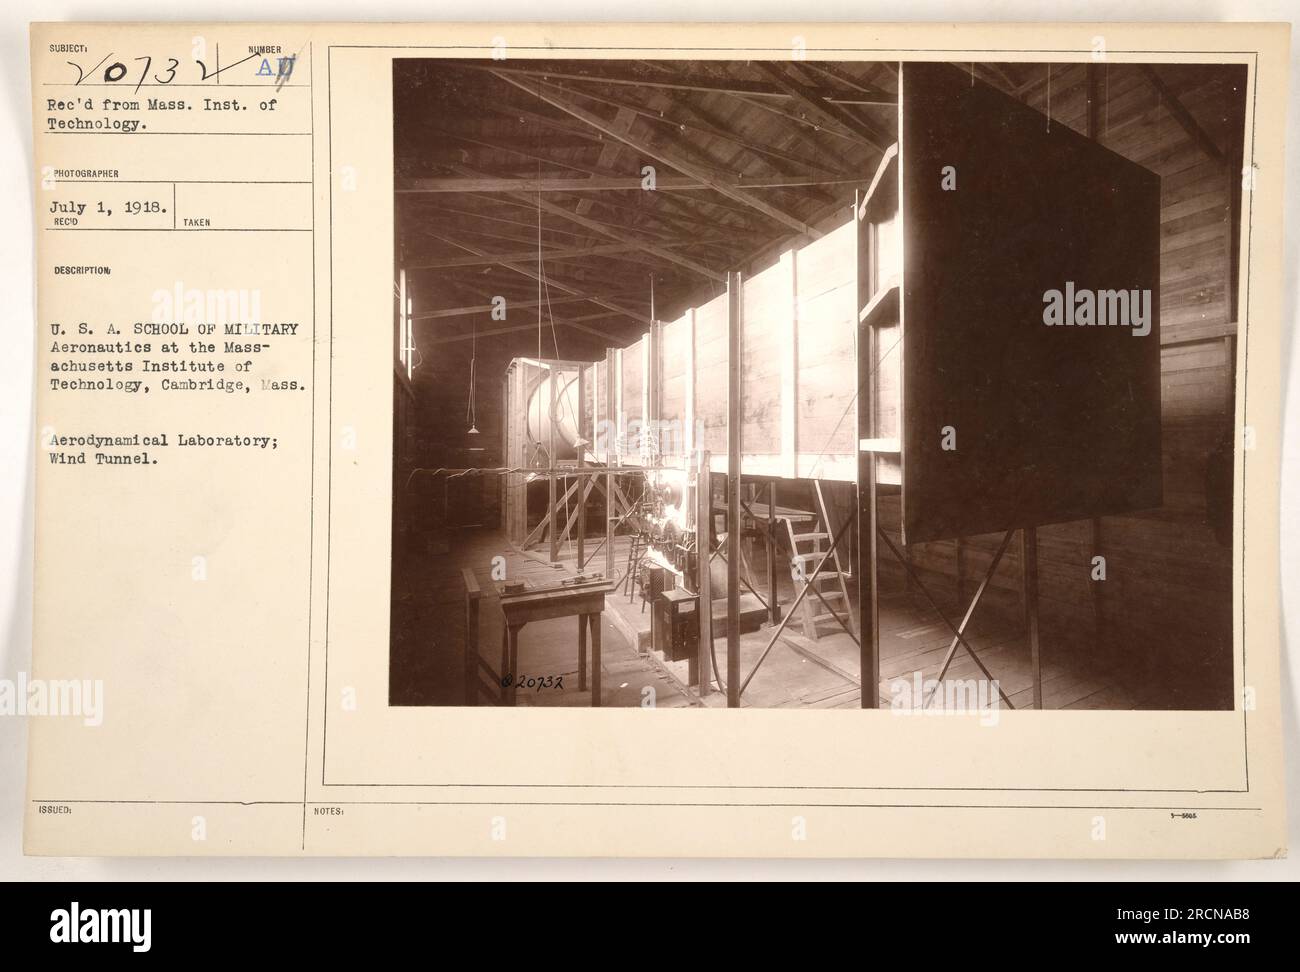 'An image taken on July 1, 1918, at the U.S.A. School of Military Aeronautics at the Massachusetts Institute of Technology (MIT) in Cambridge, Massachusetts. The photograph shows the Aerodynamical Laboratory and Wind Tunnel. This image was rec'd from Mass. Inst. of Technology and carries the description 188UED: NOTES 20732.' Stock Photo